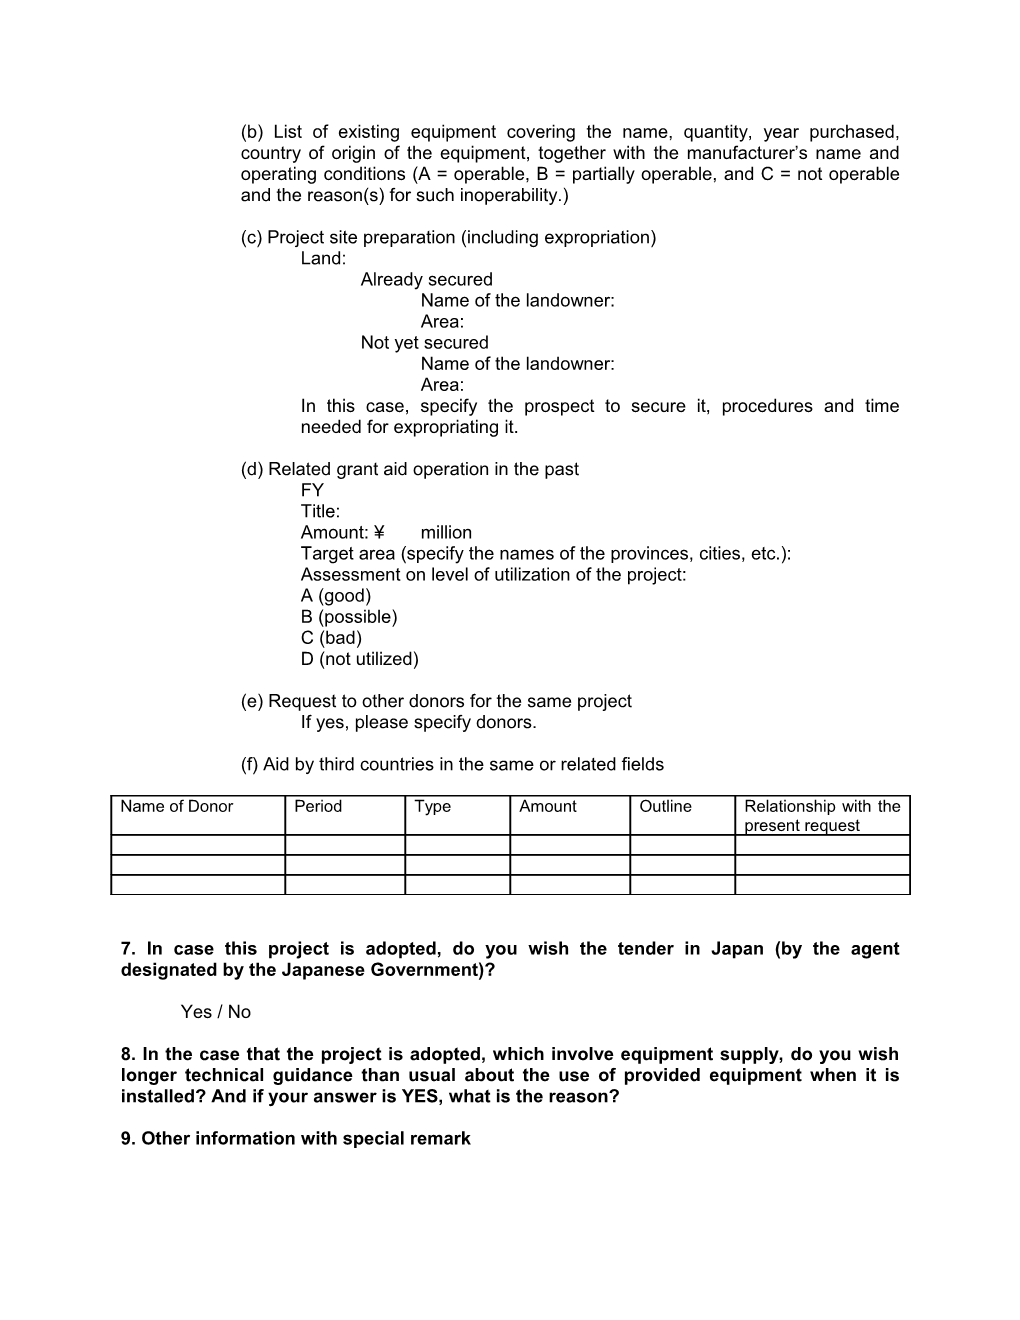 Application Form for the Japanese Cultural Grant Aid